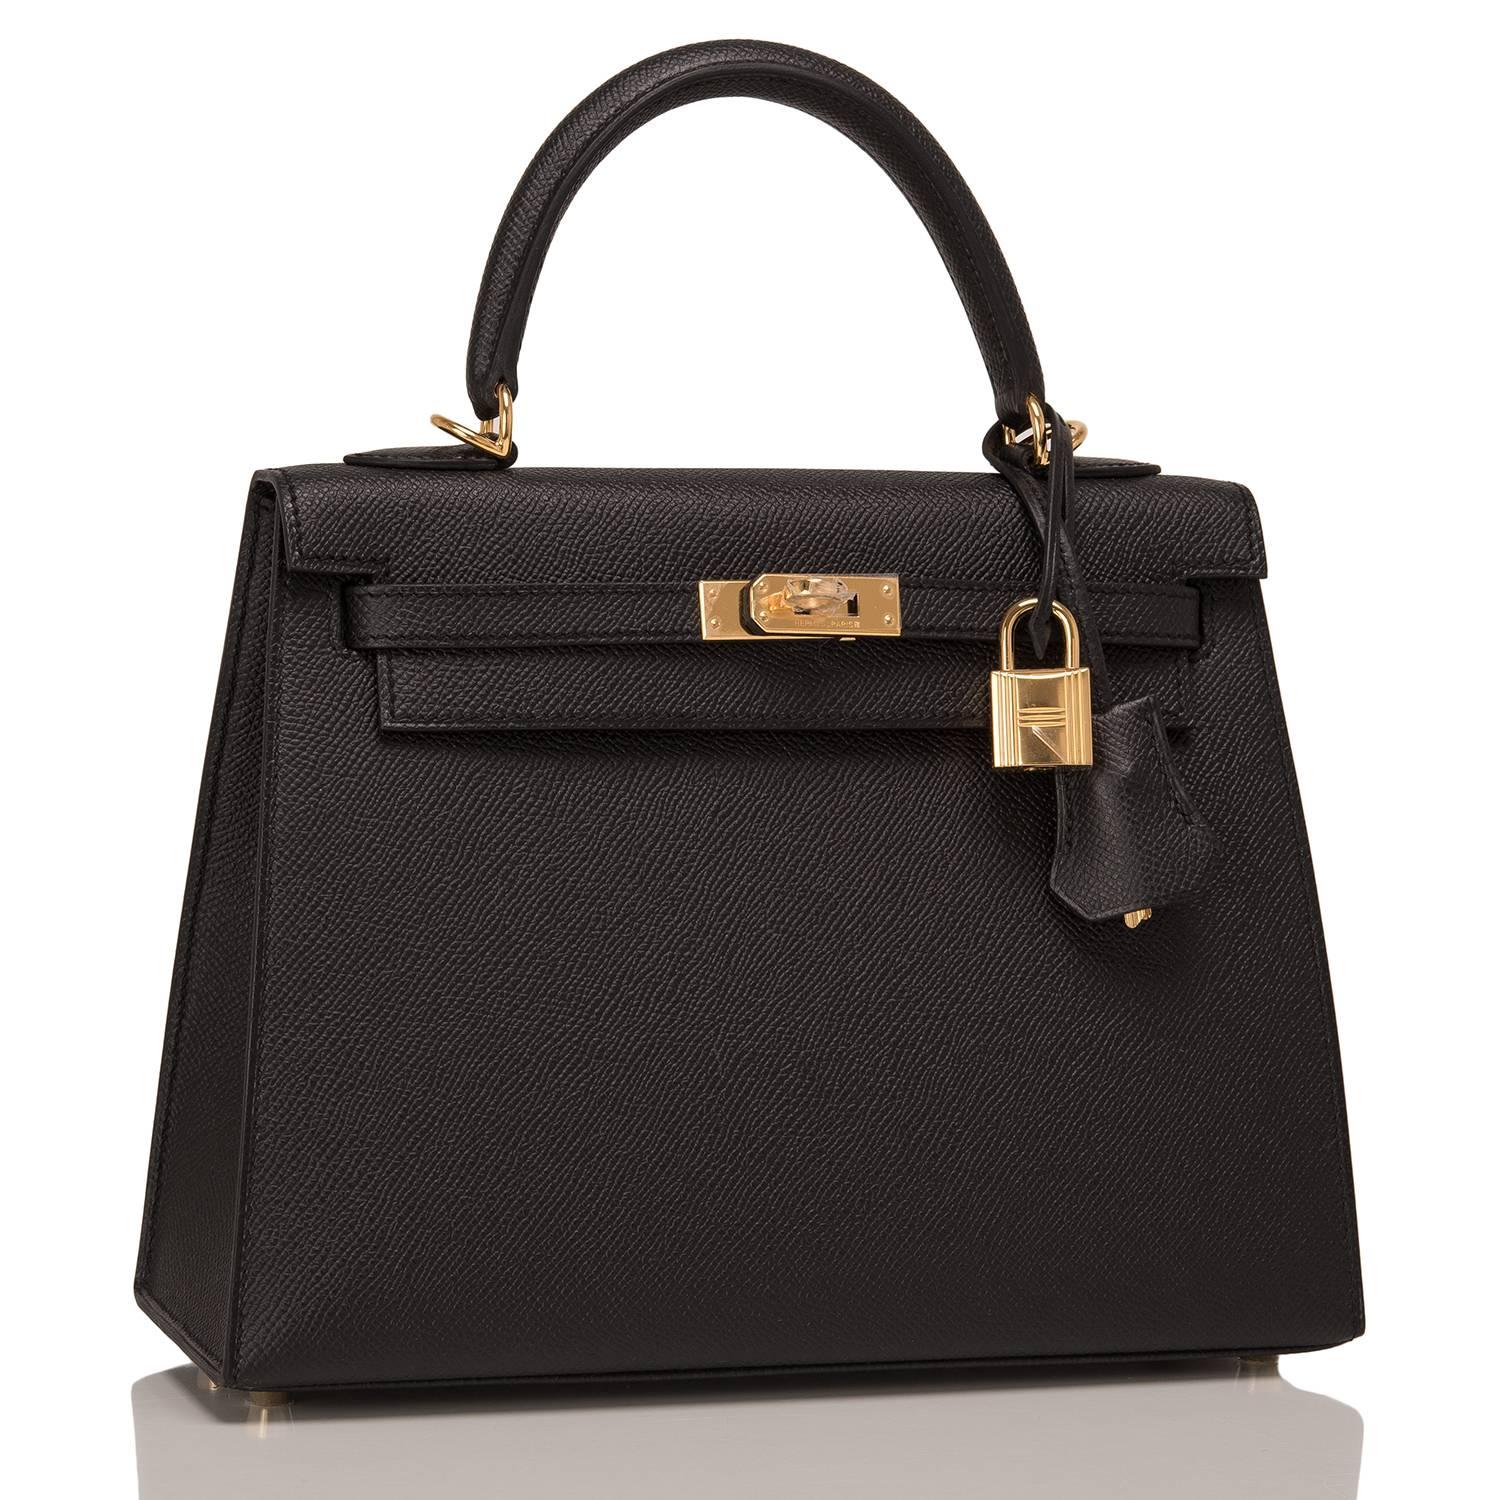 Hermes Black Sellier Kelly 25cm of epsom leather with gold hardware.

This Sellier Kelly has tonal stitching, a front toggle closure, a clochette with lock and two keys, a single rolled handle and an optional shoulder strap.

The interior is